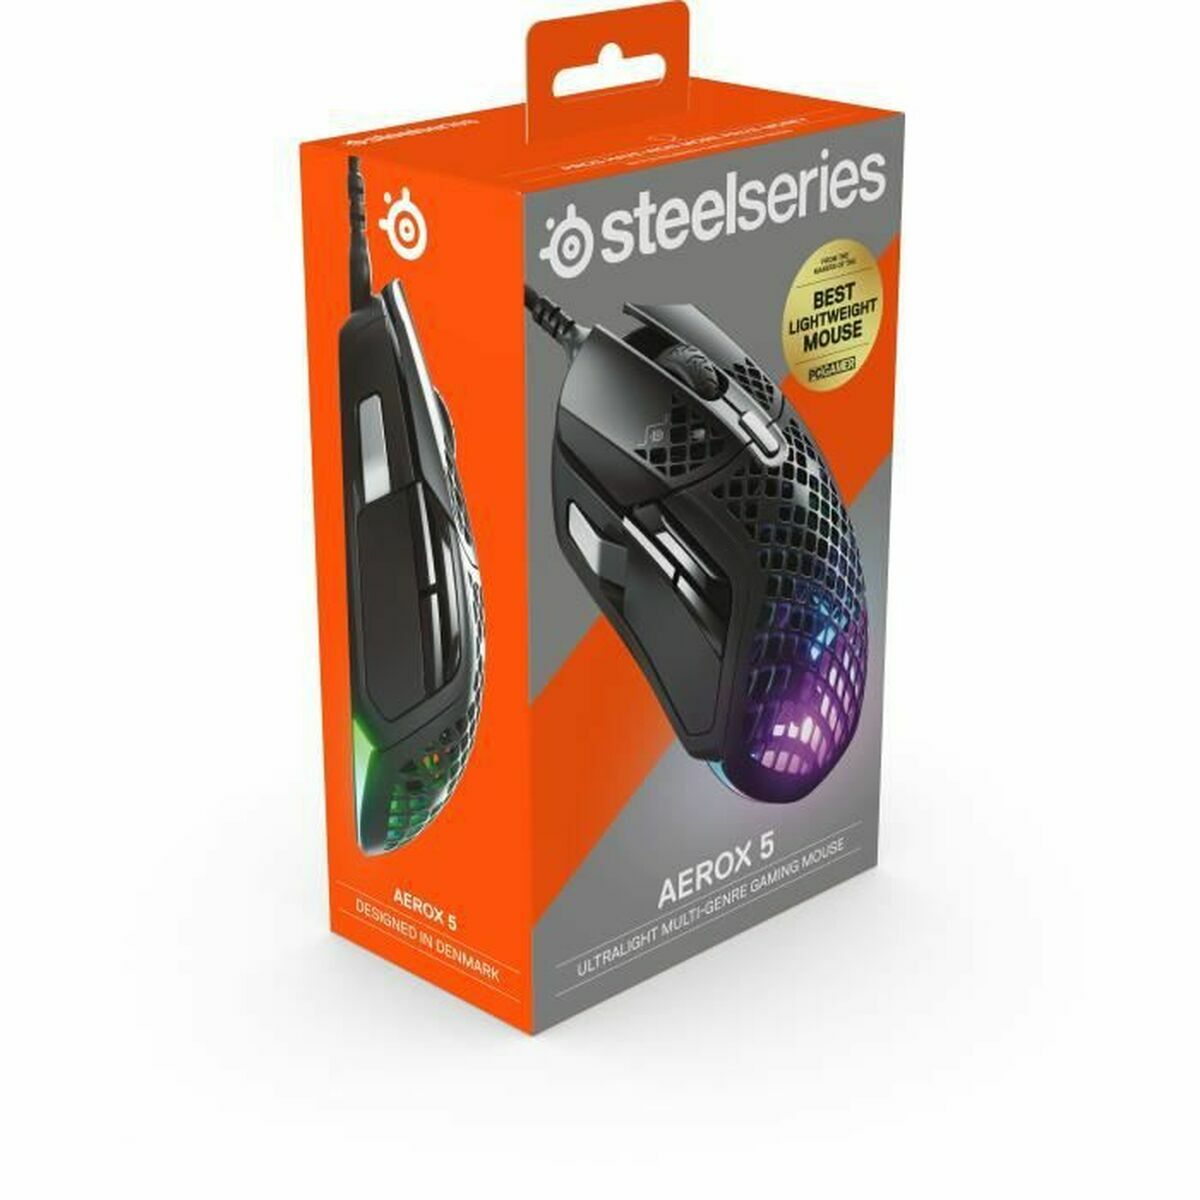 Mouse SteelSeries Aerox 5 Black Gaming LED Lights With cable, SteelSeries, Computing, Accessories, mouse-steelseries-aerox-5-black-gaming-led-lights-with-cable, :Gaming, Brand_SteelSeries, category-reference-2609, category-reference-2642, category-reference-2656, category-reference-t-19685, category-reference-t-19908, category-reference-t-21353, computers / peripherals, Condition_NEW, office, Price_100 - 200, RiotNook